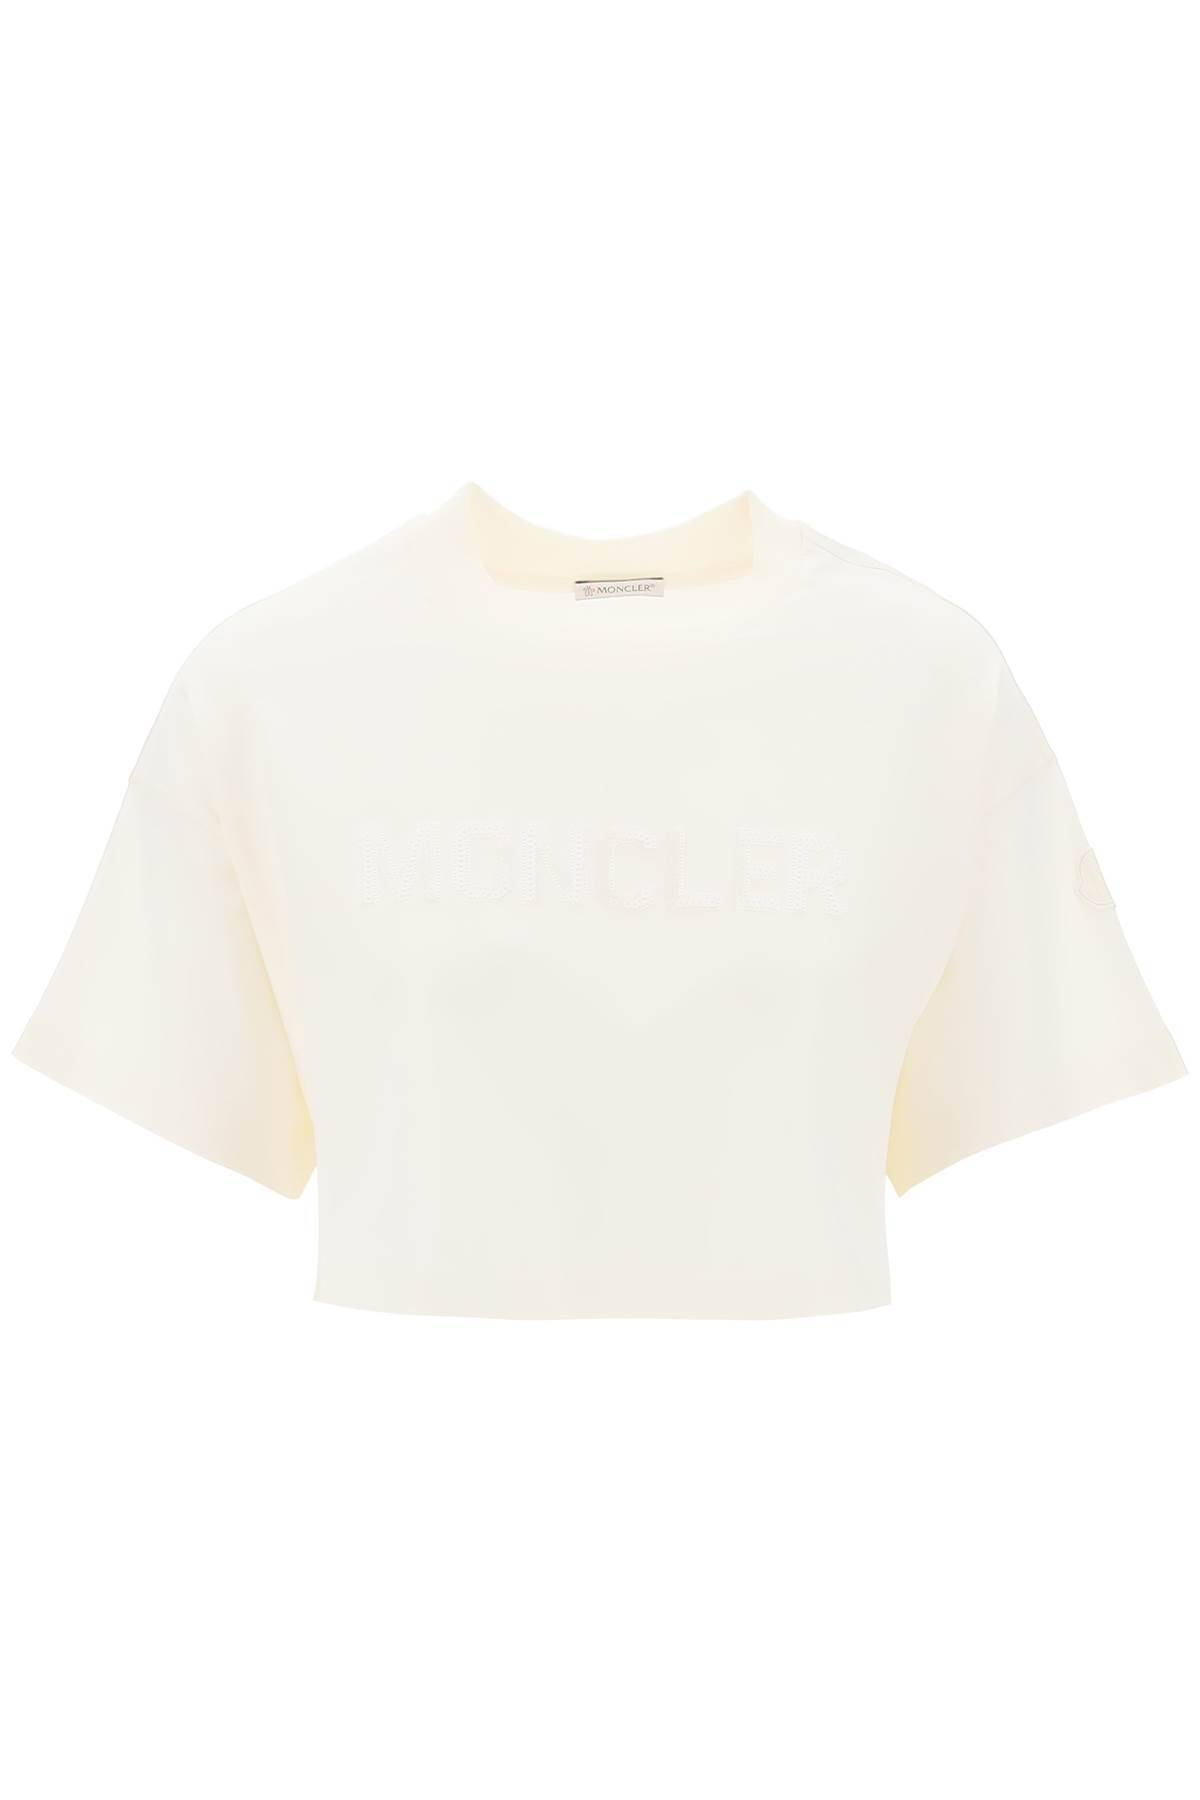 Moncler MONCLER cropped t-shirt with sequin logo